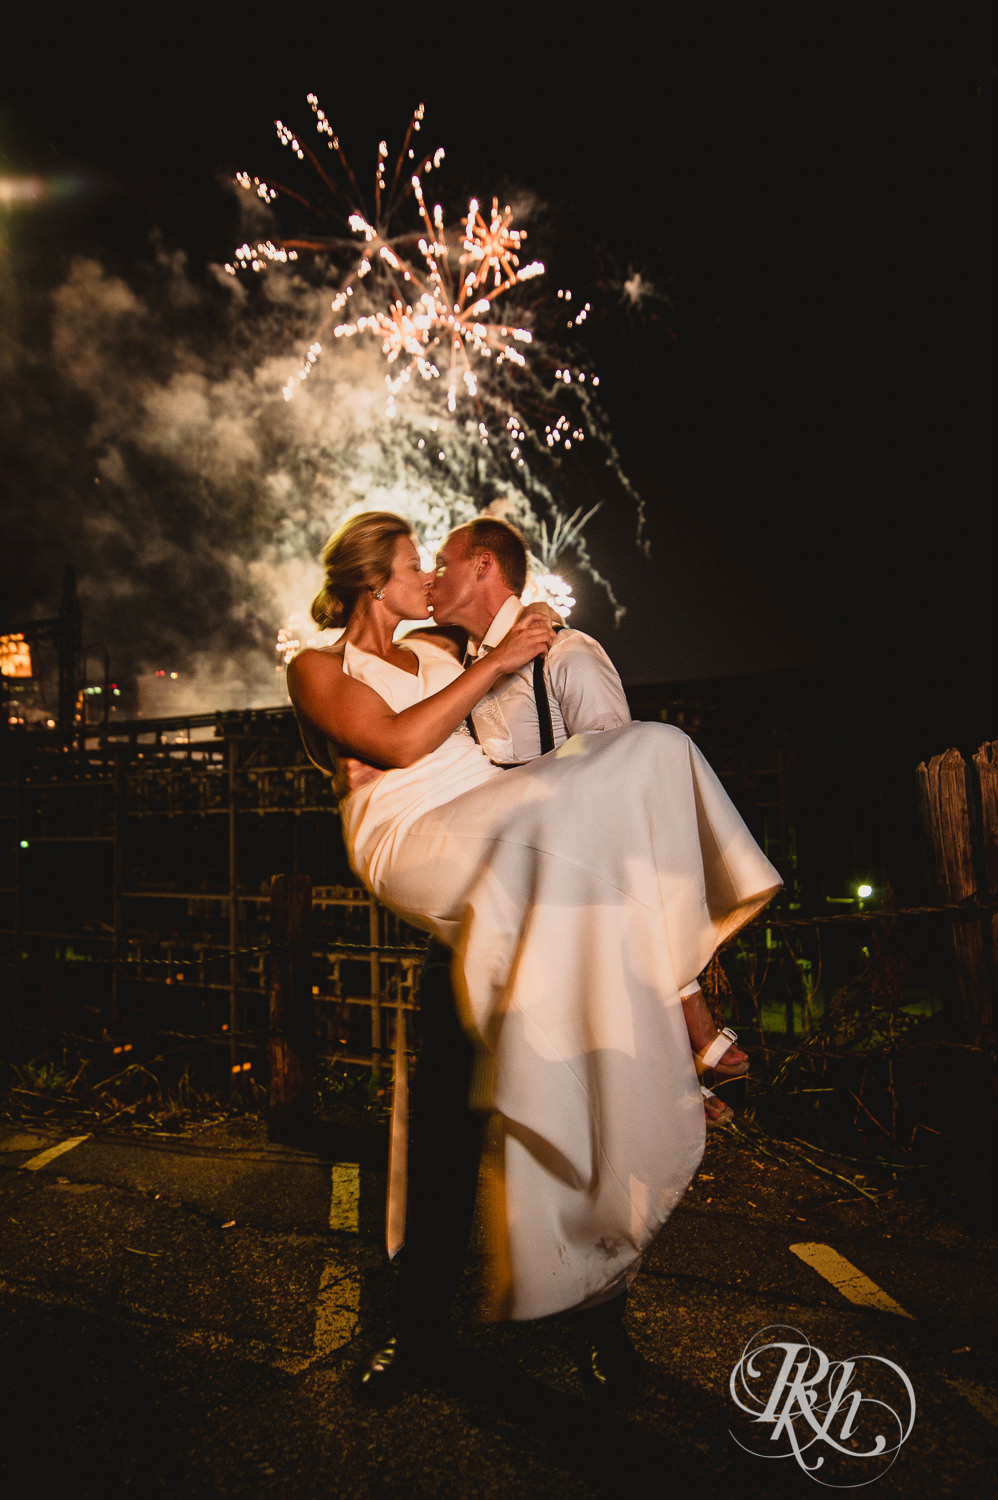 Bride and groom kiss in front of fireworks in Minneapolis, Minnesota.